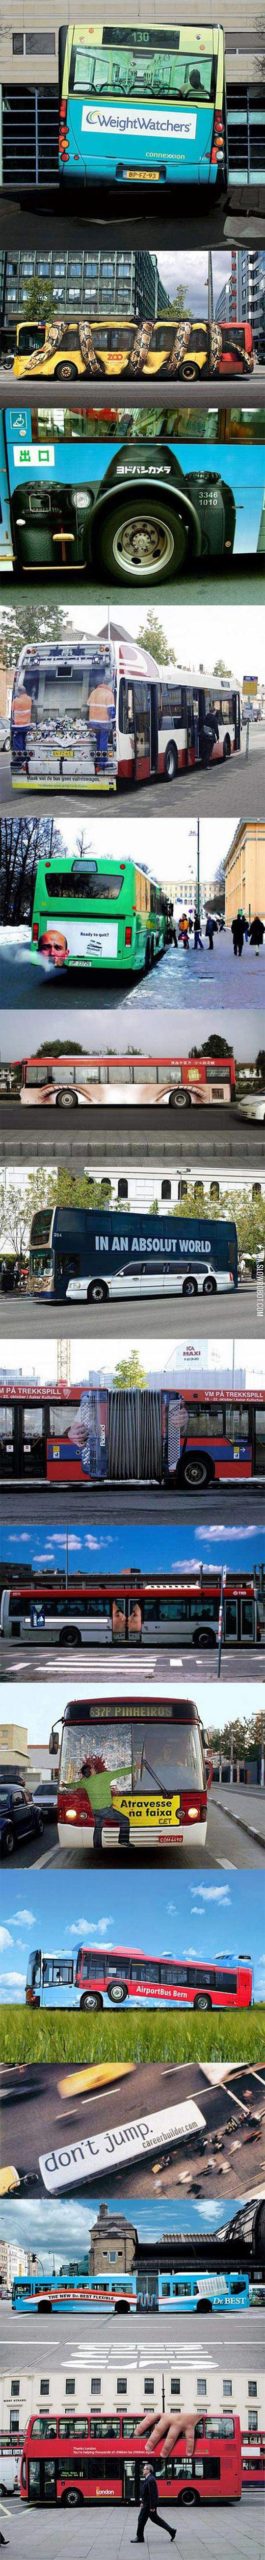 When+Buses+Get+Creative